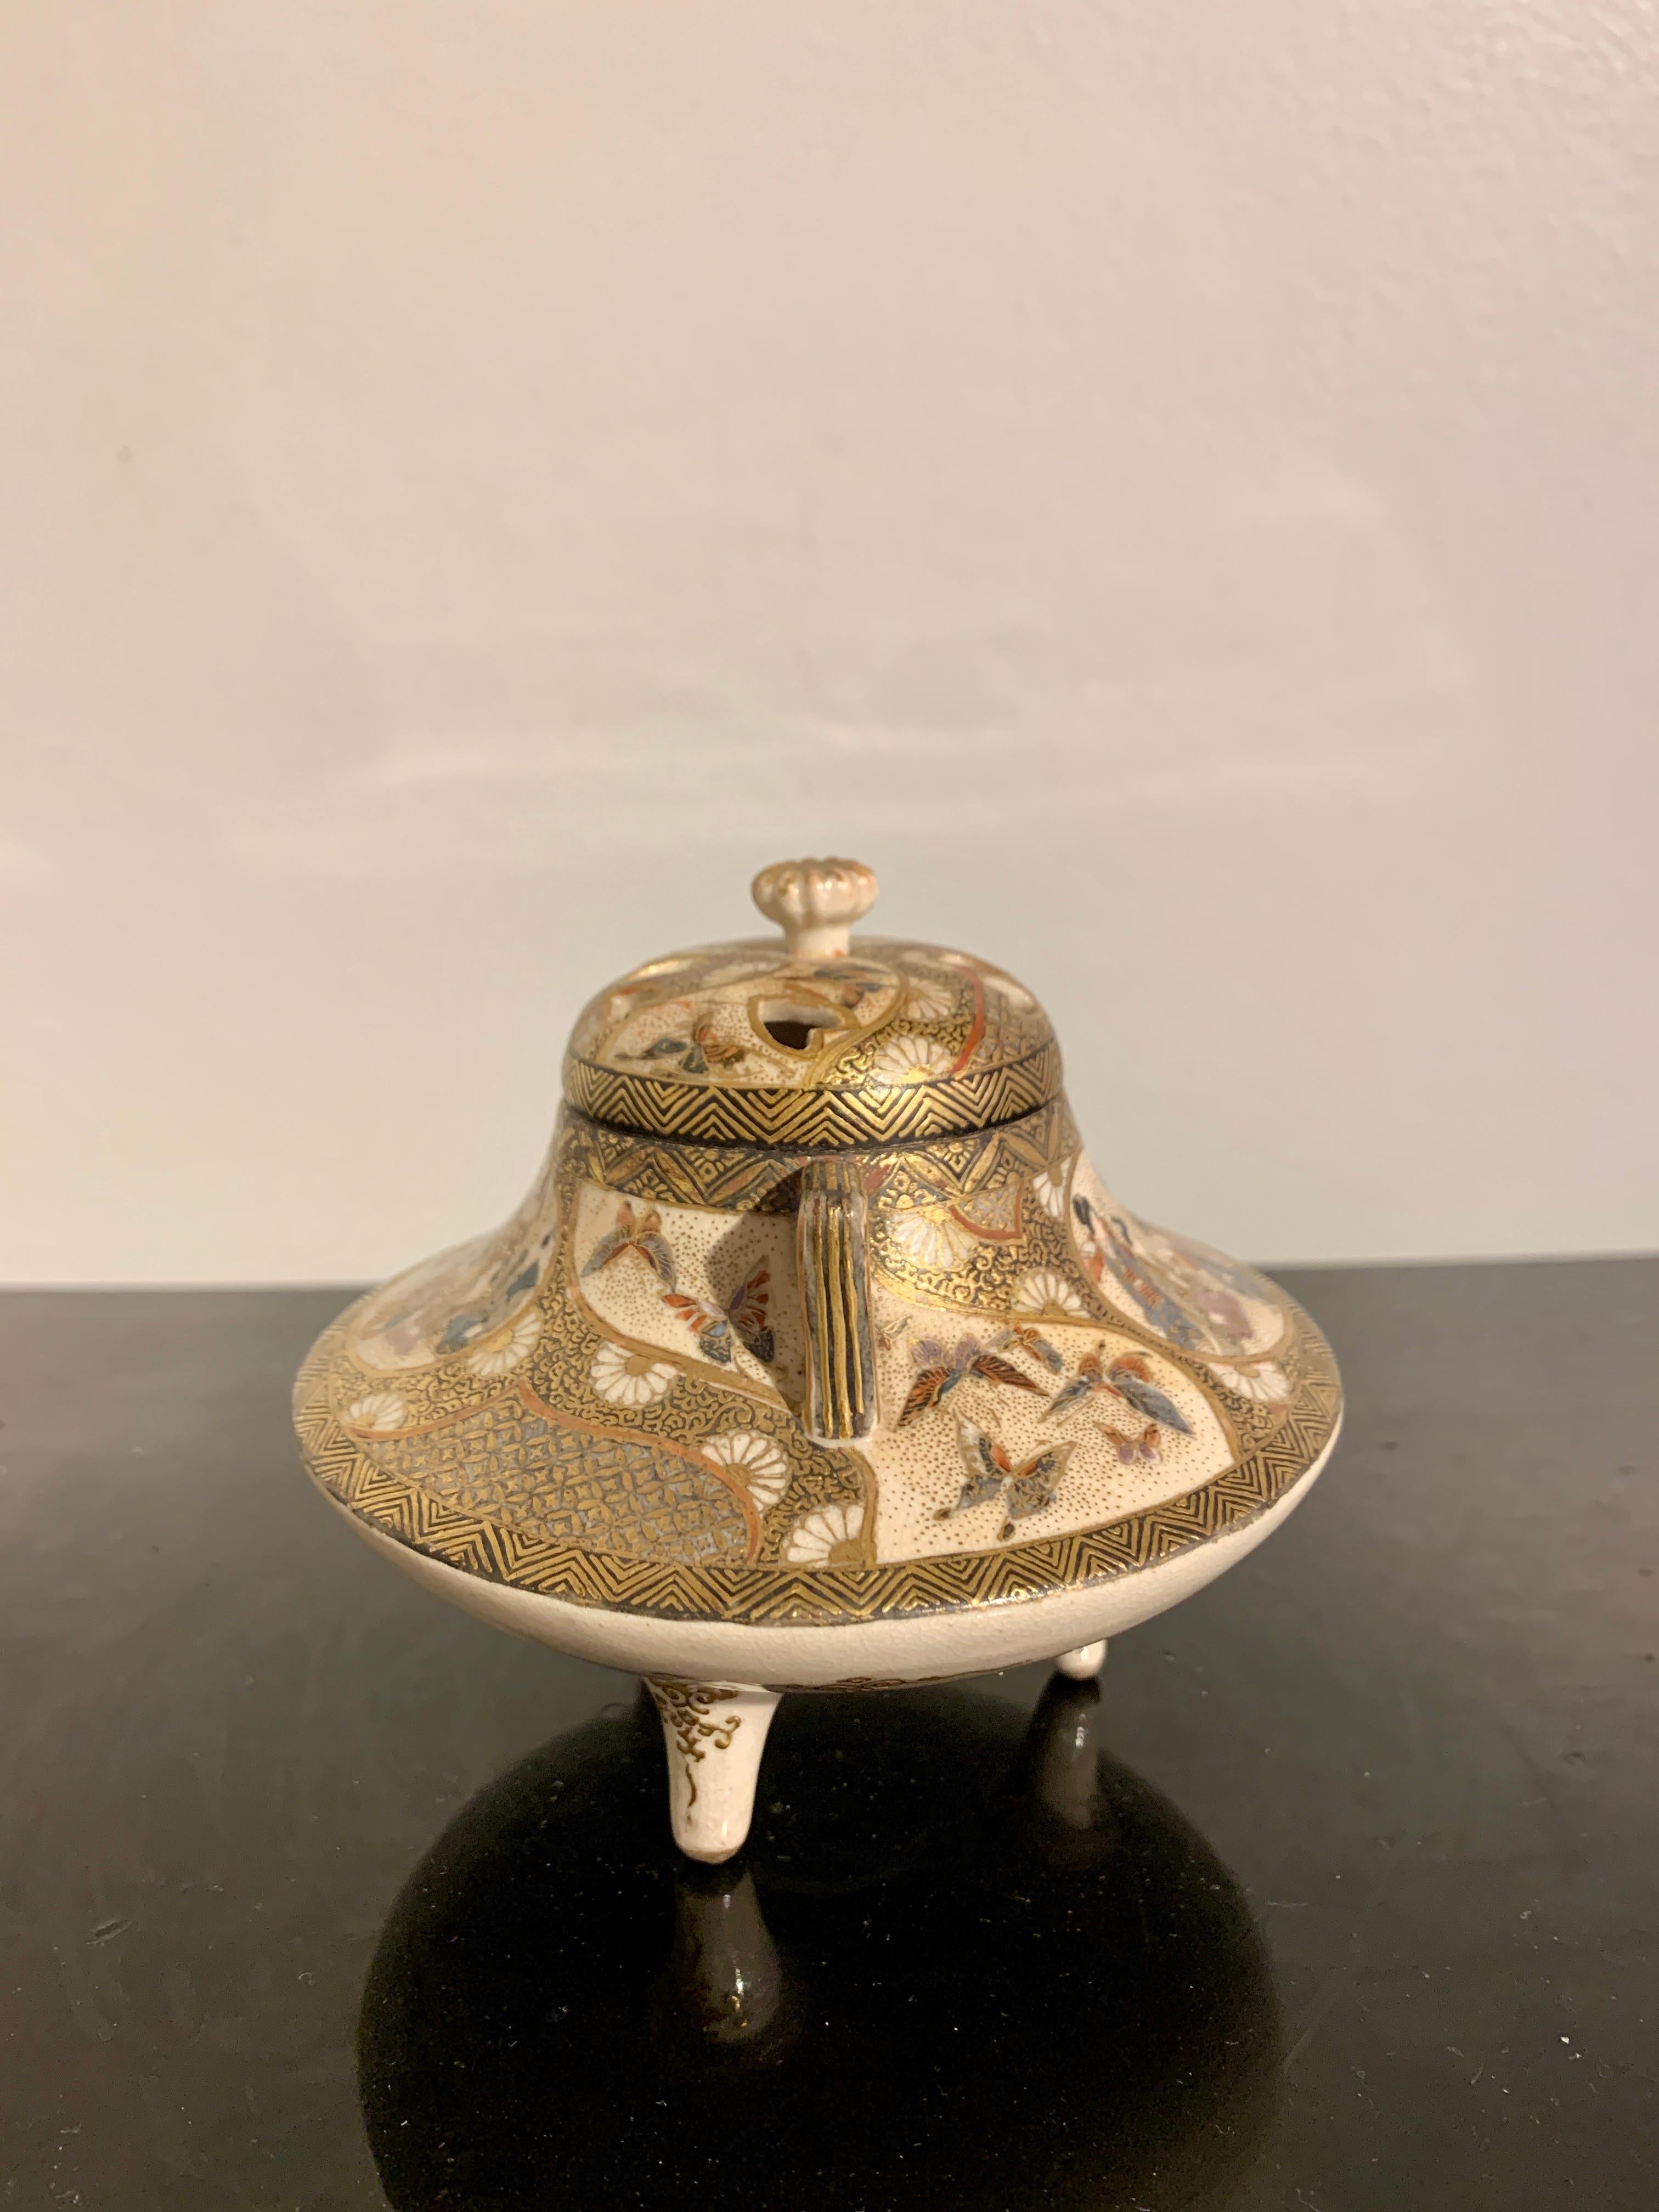 A small and finely decorated Japanese Satsuma tripod incense burner (koro), signed Kyozan, Meiji period, circa 1900, Japan.

The censer, koro, with a compressed body supported by three elegantly splayed legs. A pair of handles and a pierced cover